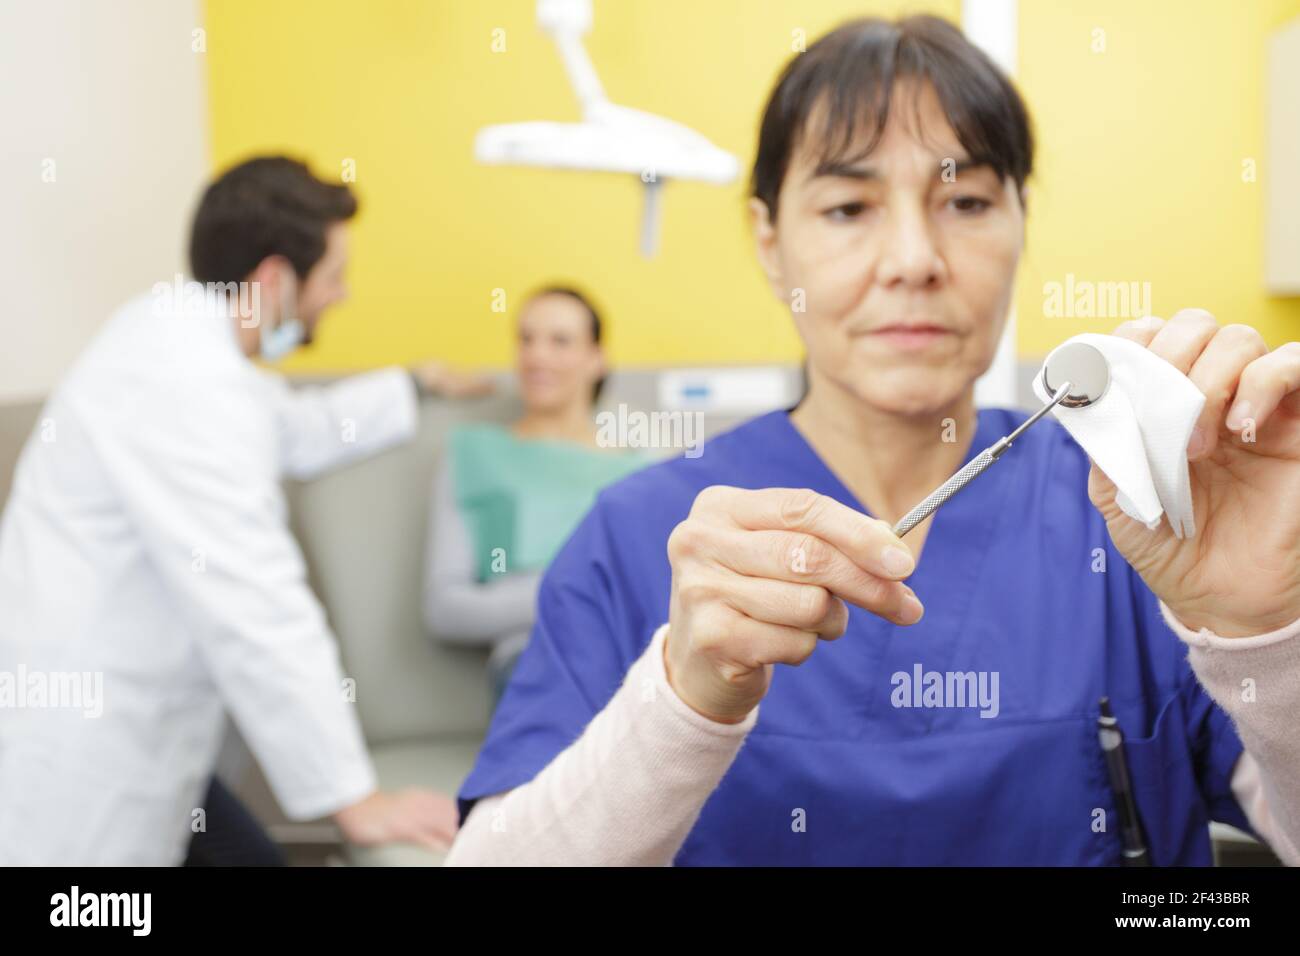 female medical worker preparing for surgery Stock Photo